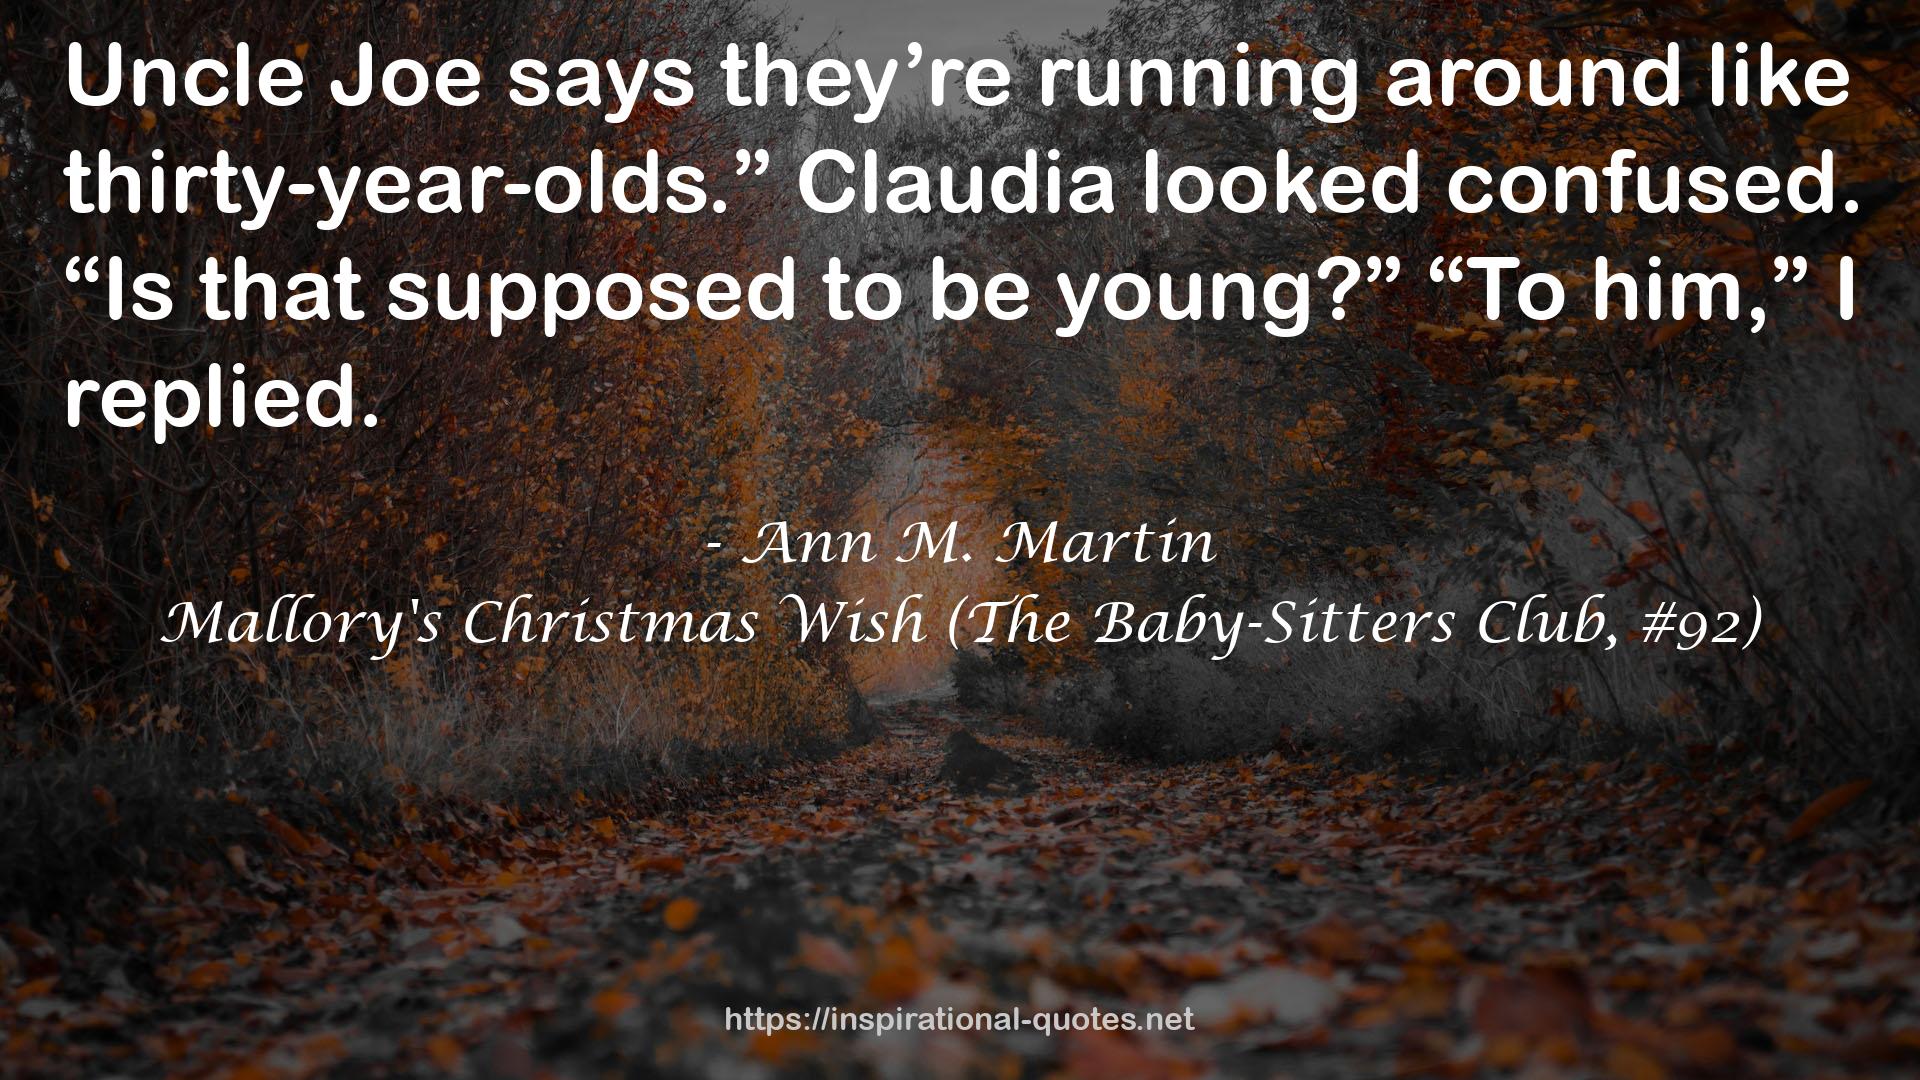 Mallory's Christmas Wish (The Baby-Sitters Club, #92) QUOTES